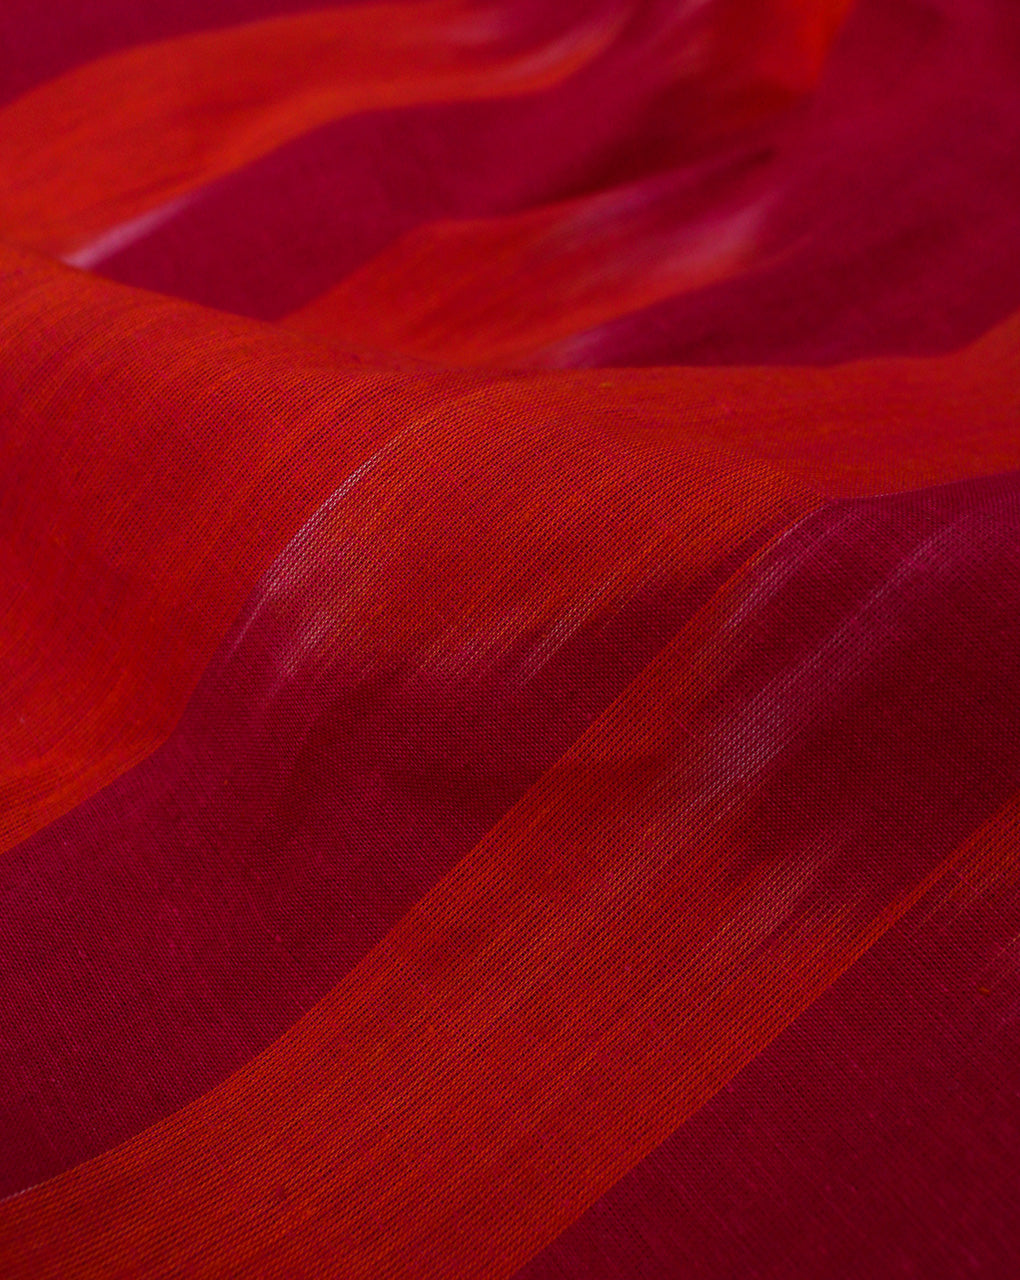 PINK AND RED YARN DYED COTTON IKAT FABRIC